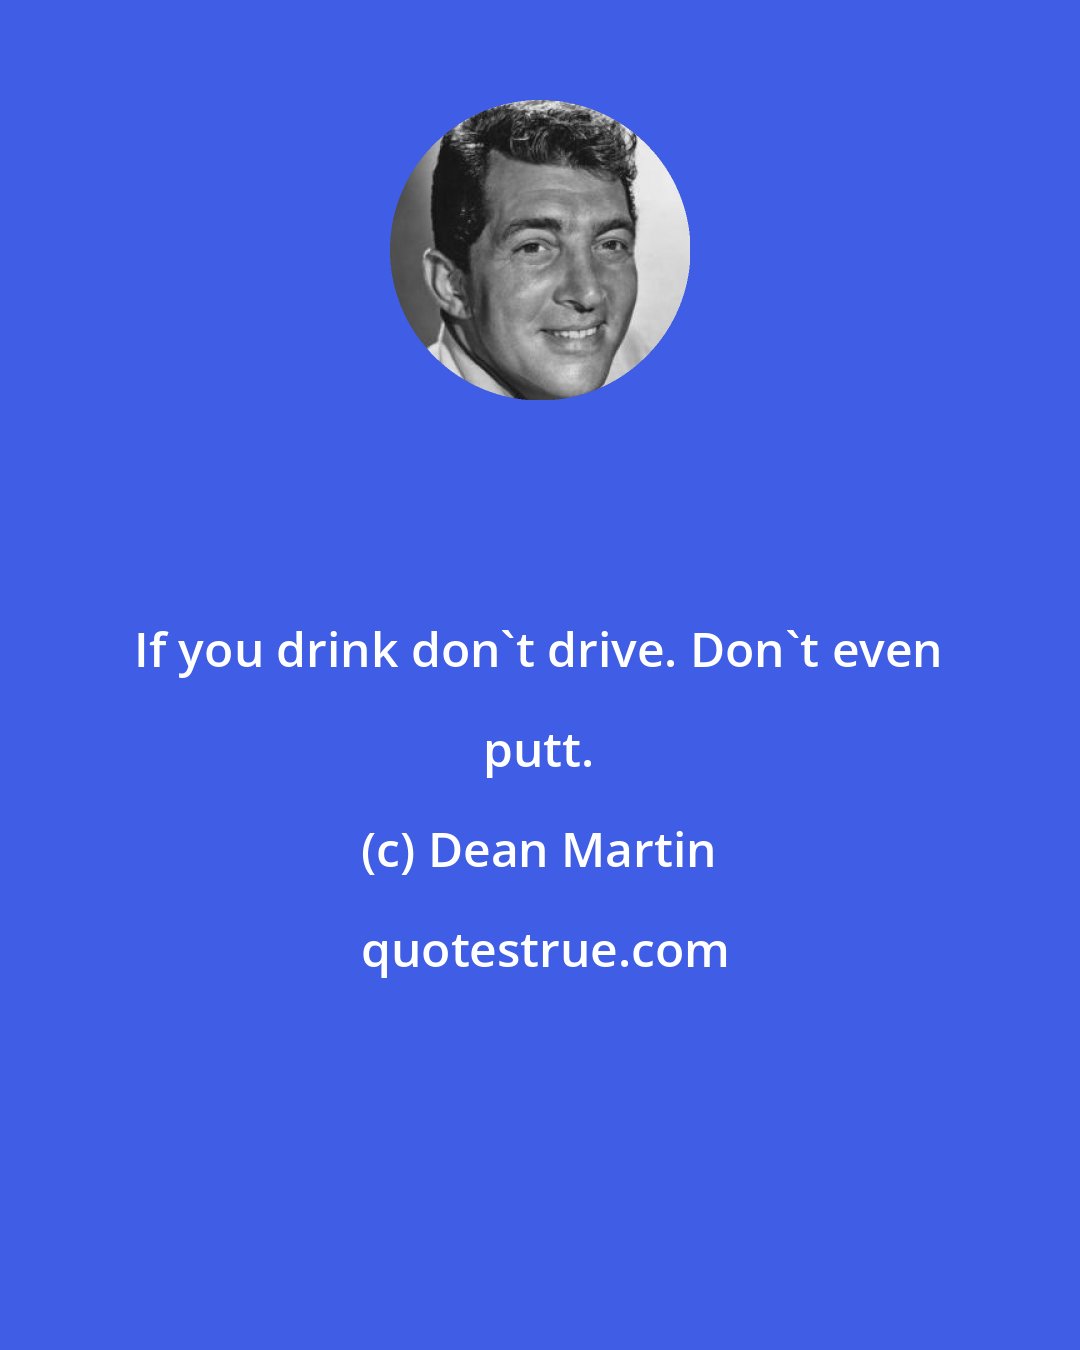 Dean Martin: If you drink don't drive. Don't even putt.